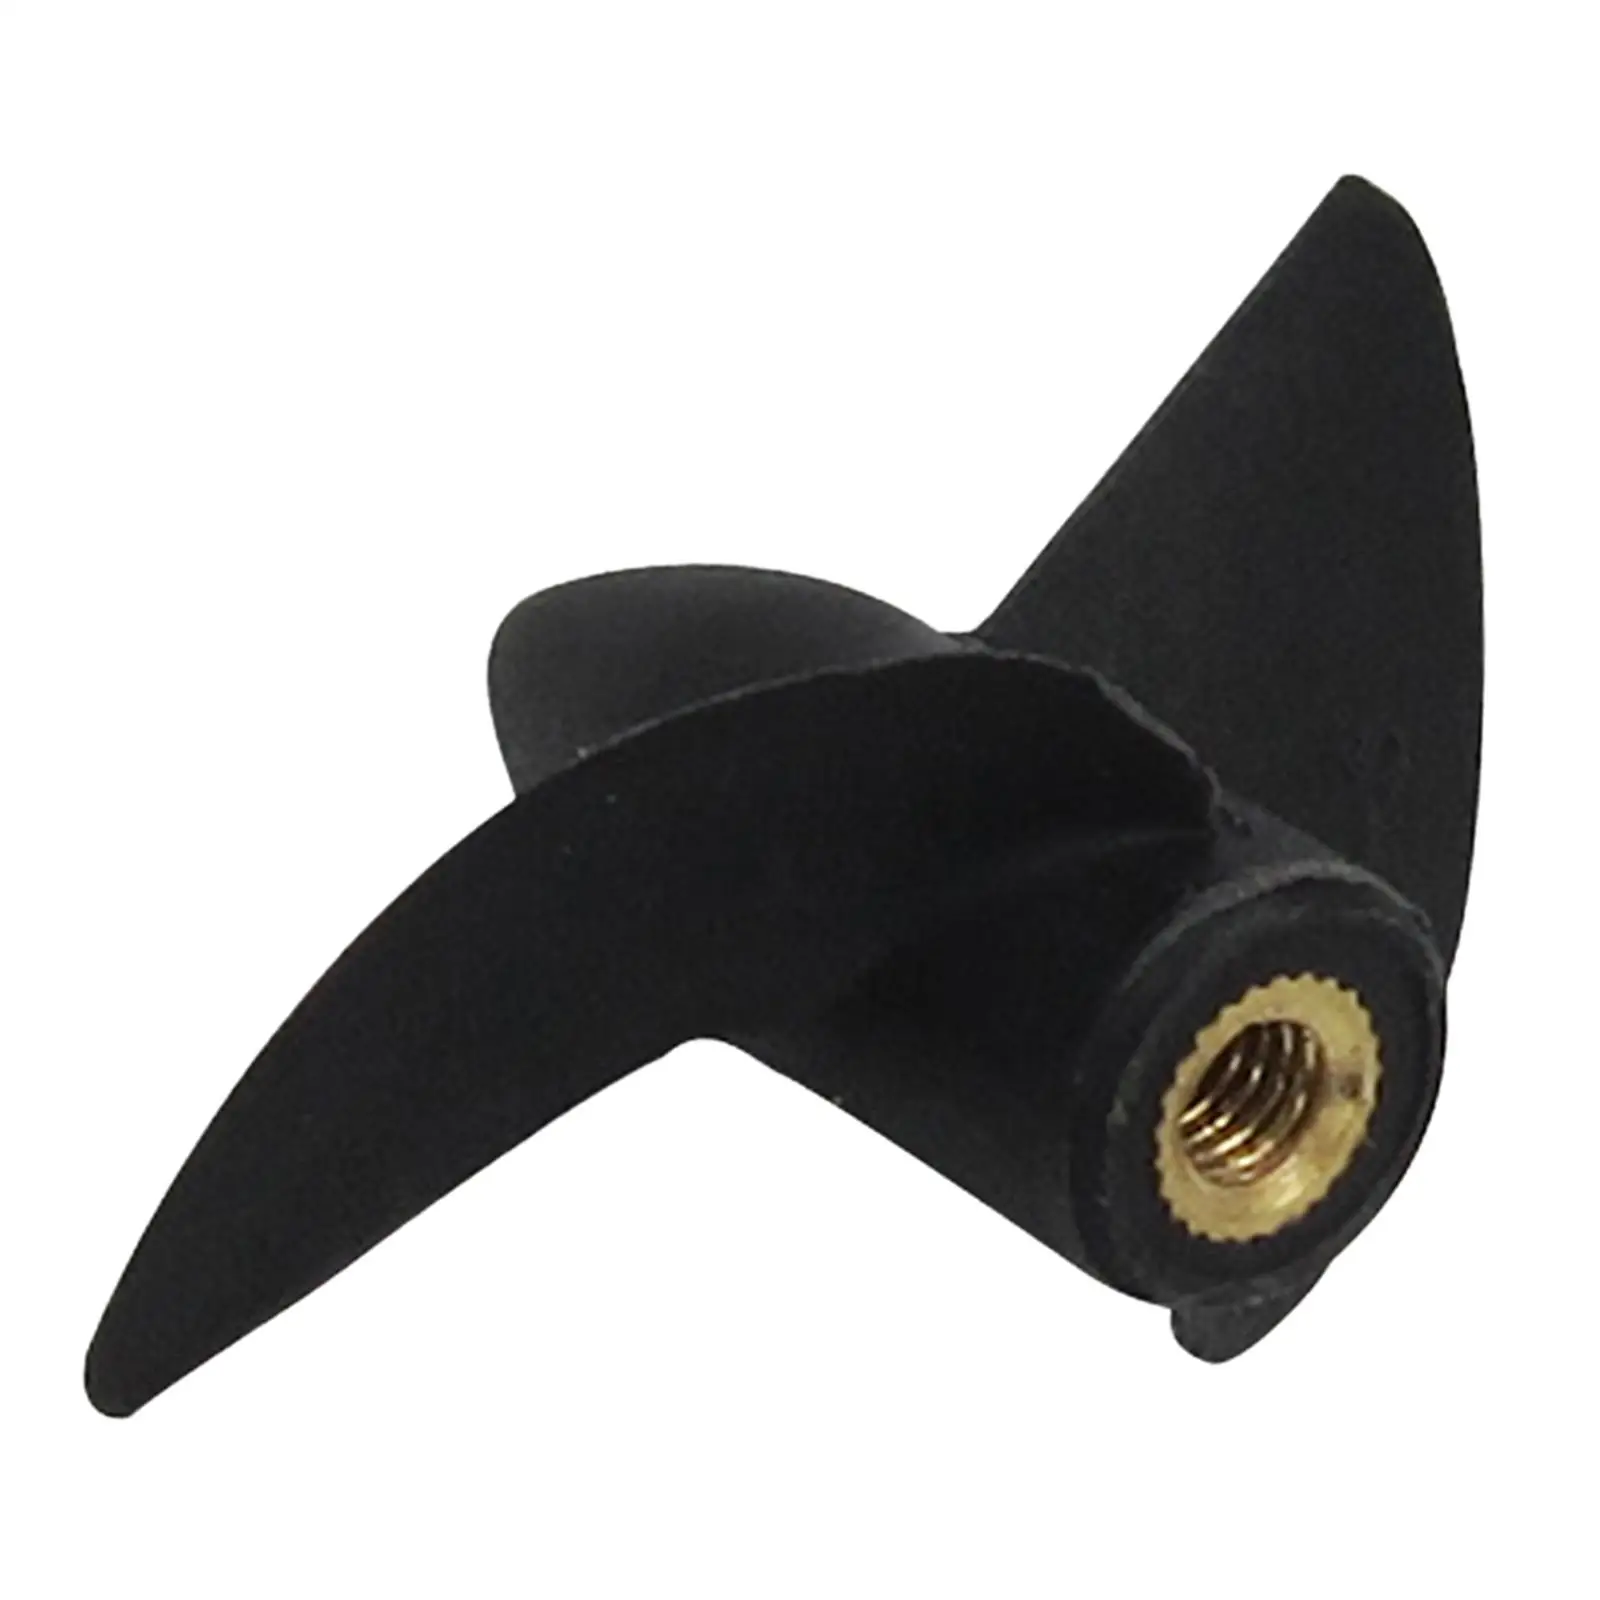 RC Boat Propellers M4 Thread Model Boat Propellers Remote Control Boat Propellers Replacements Parts Accessory